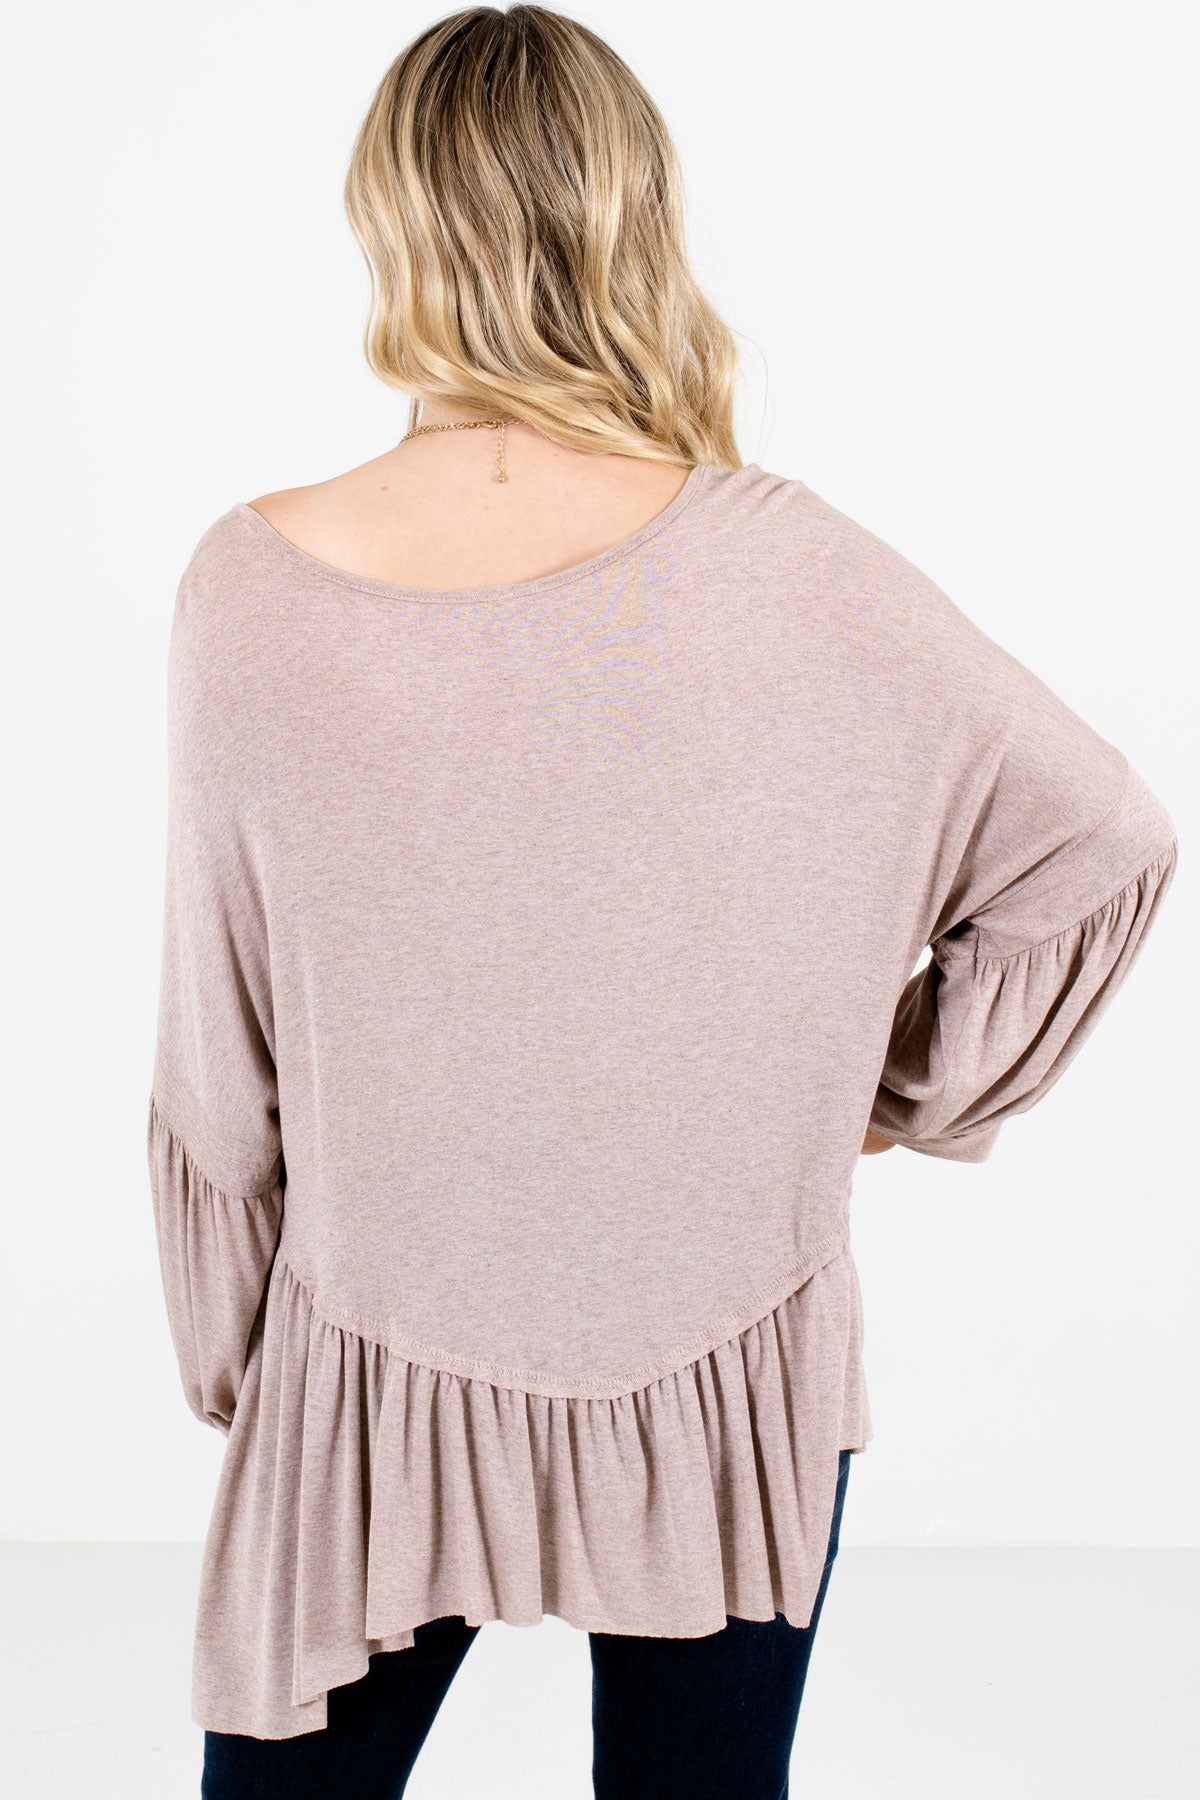 Women's Taupe Brown Ruffled Hem Boutique Top